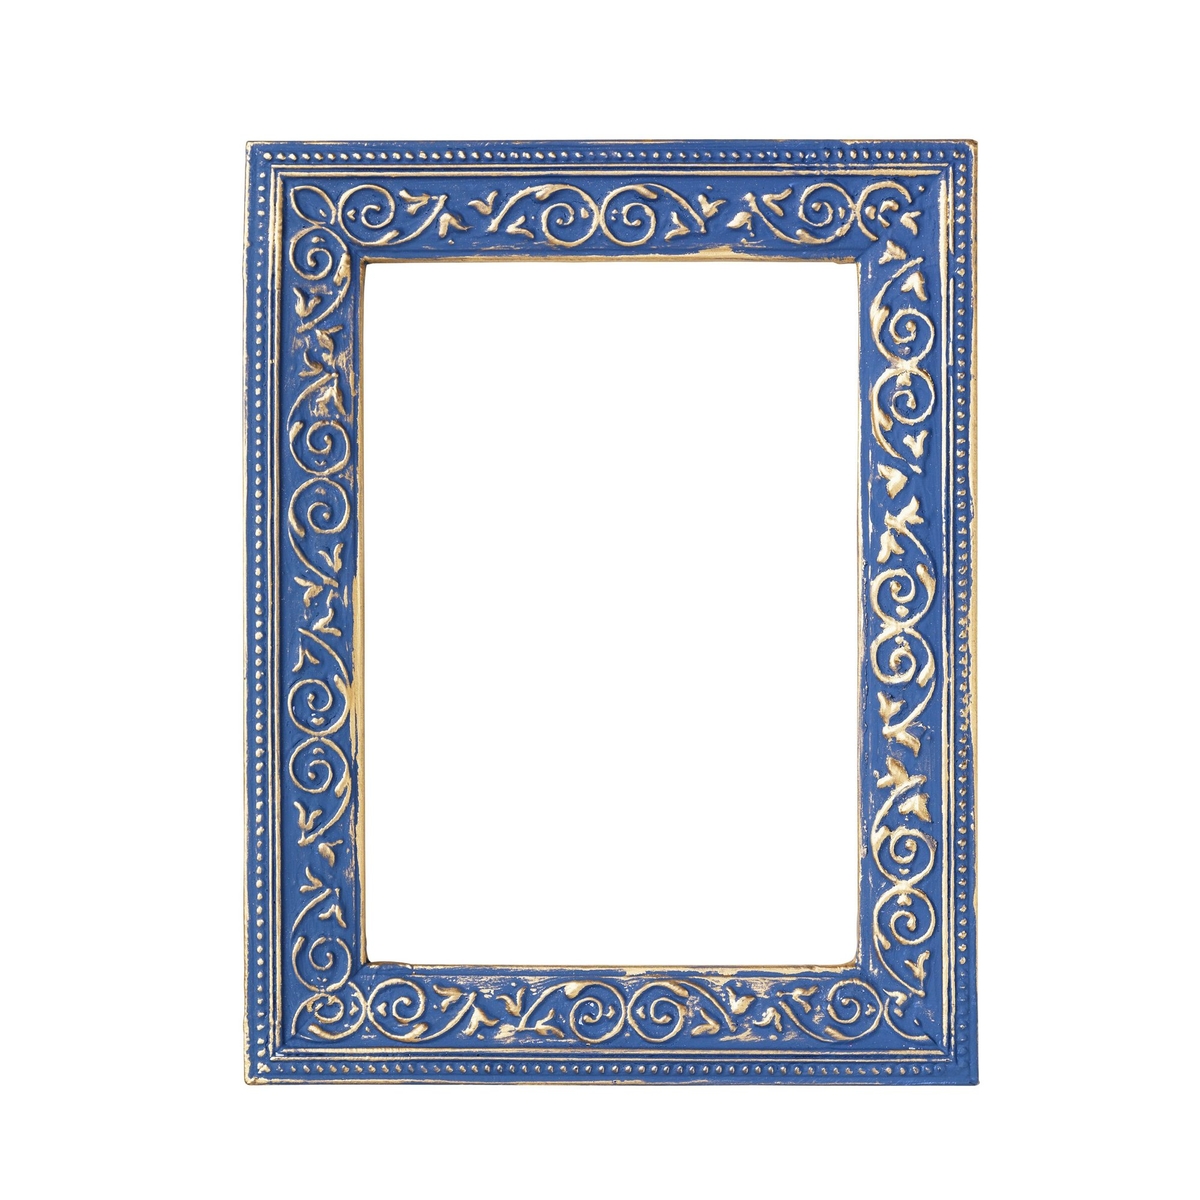 Frame with radiance!